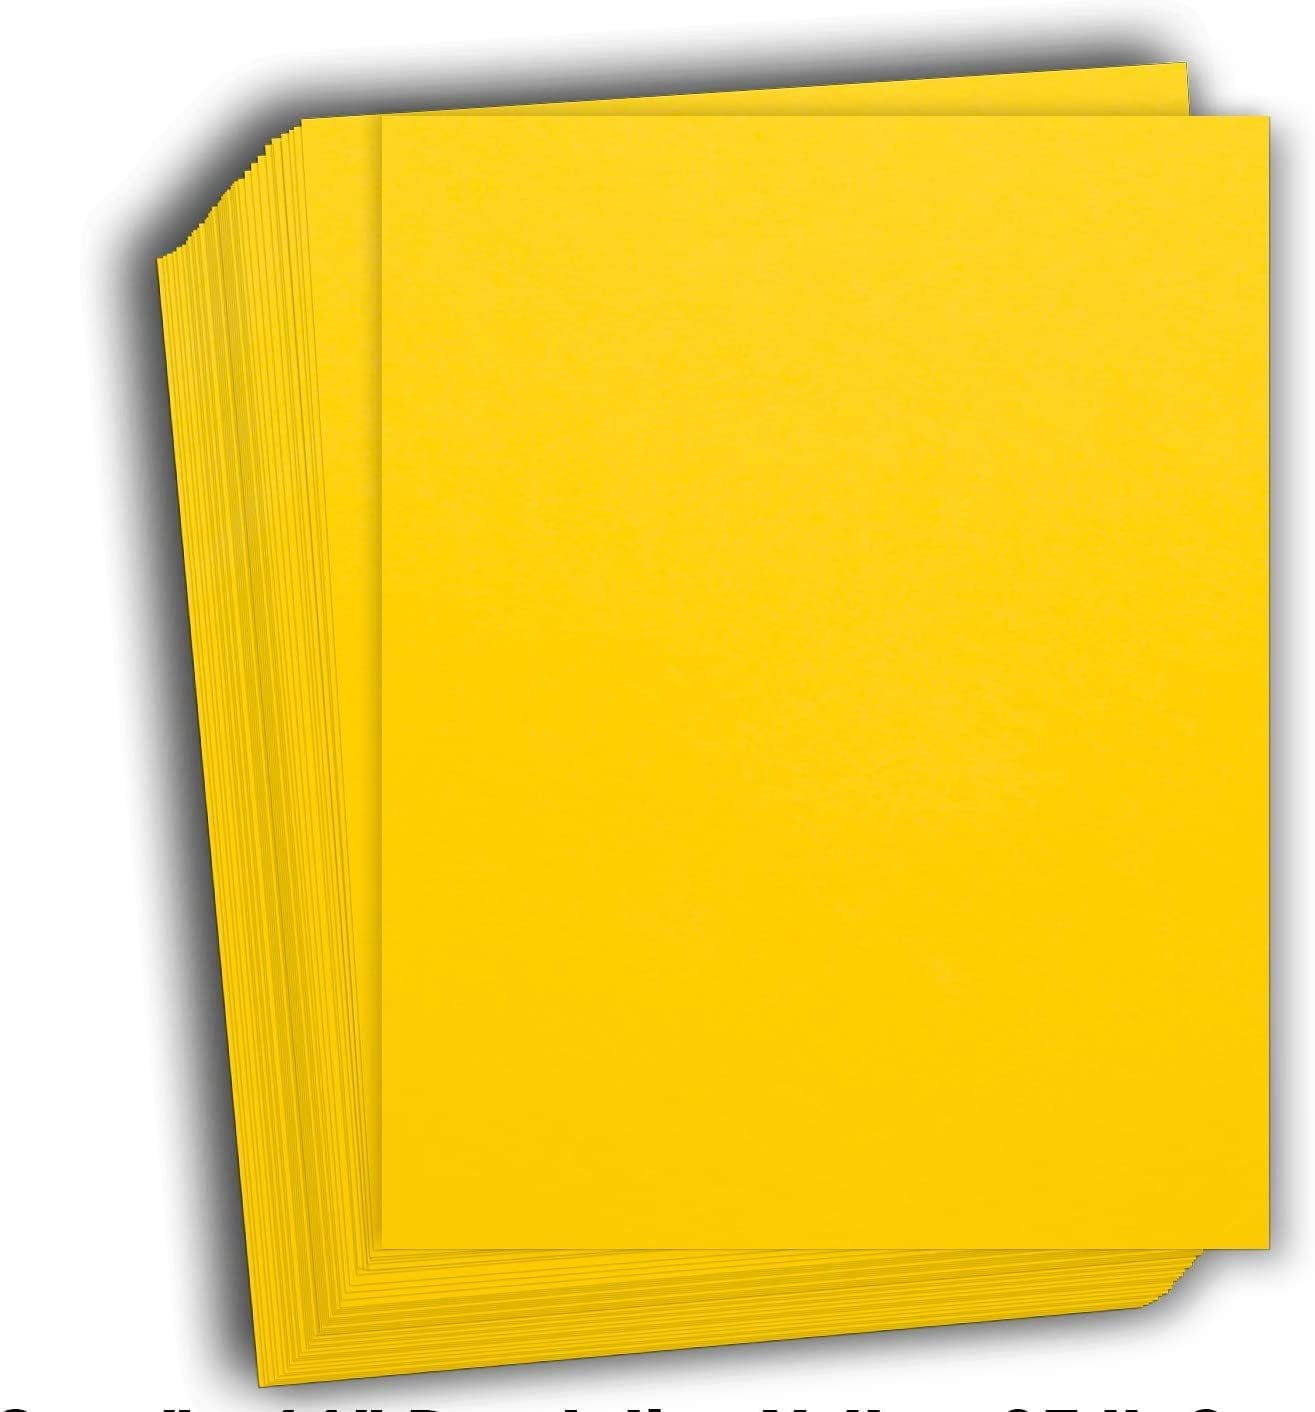  50Sheets Yellow Cardstock Paper, 8.5 x 11 Card stock for Cricut,  Thick Construction Paper for Card Making, Scrapbooking, Craft 90 lb / 250  gsm (Yellow)… : Arts, Crafts & Sewing